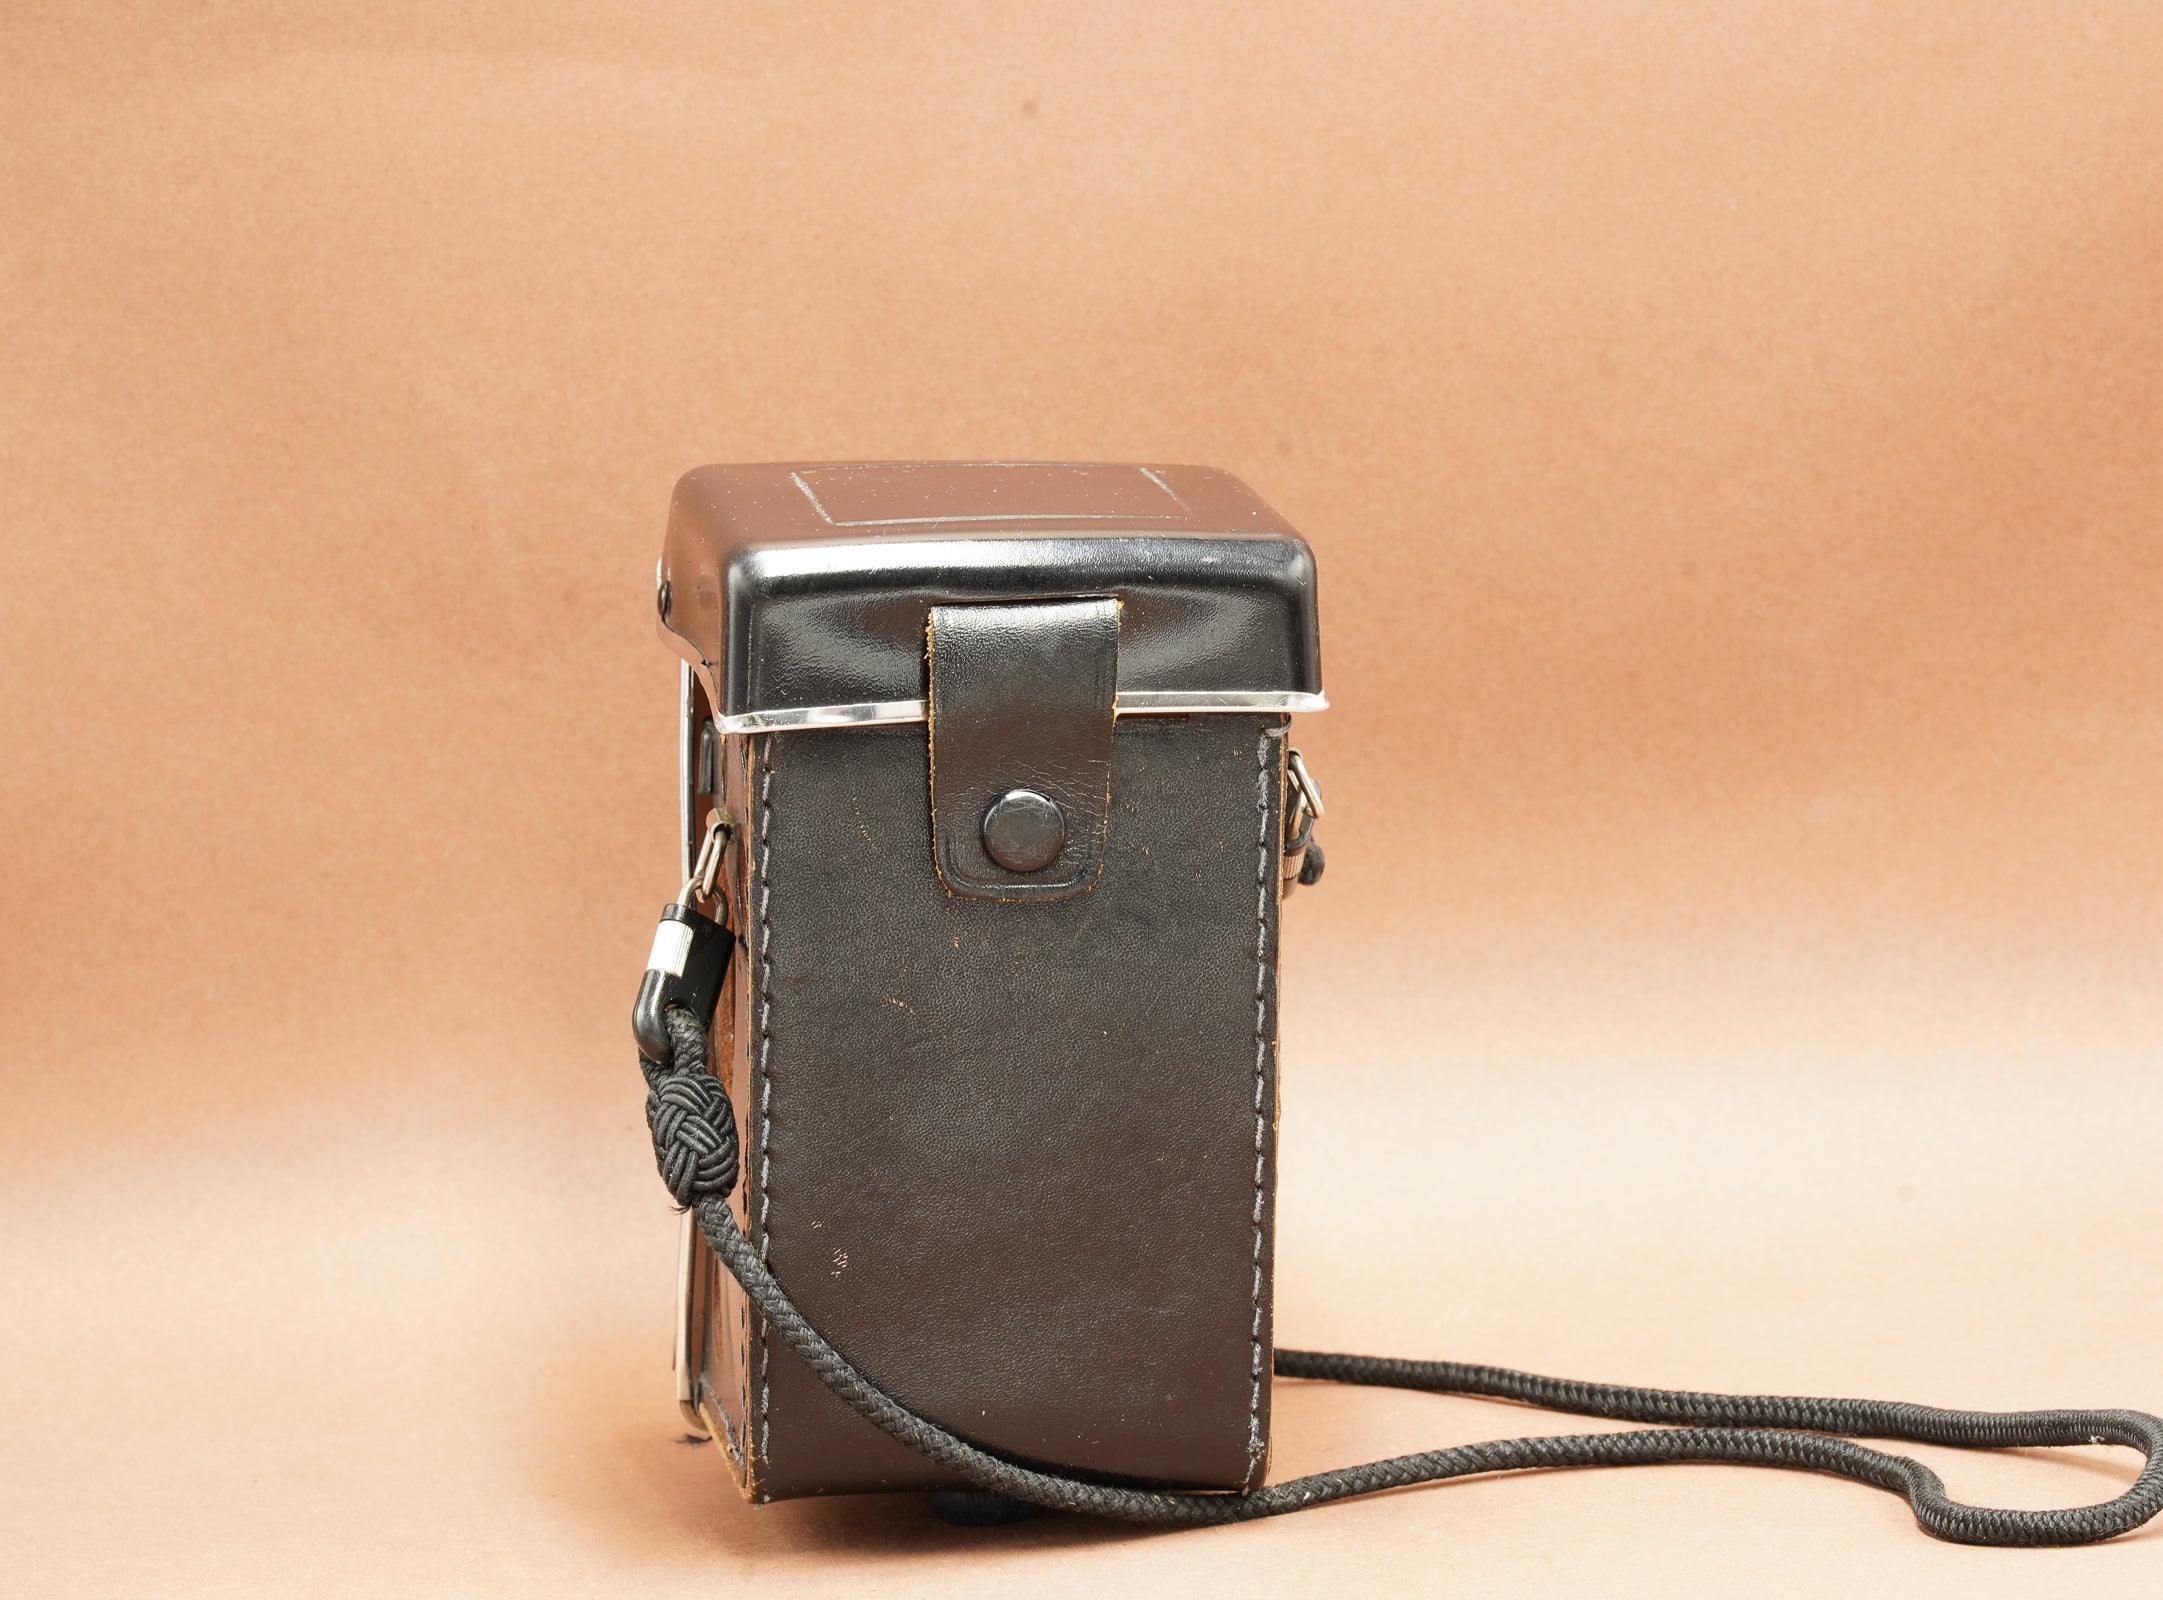 LEATHER CASE for Yashica Mat 124G TLR medium format system